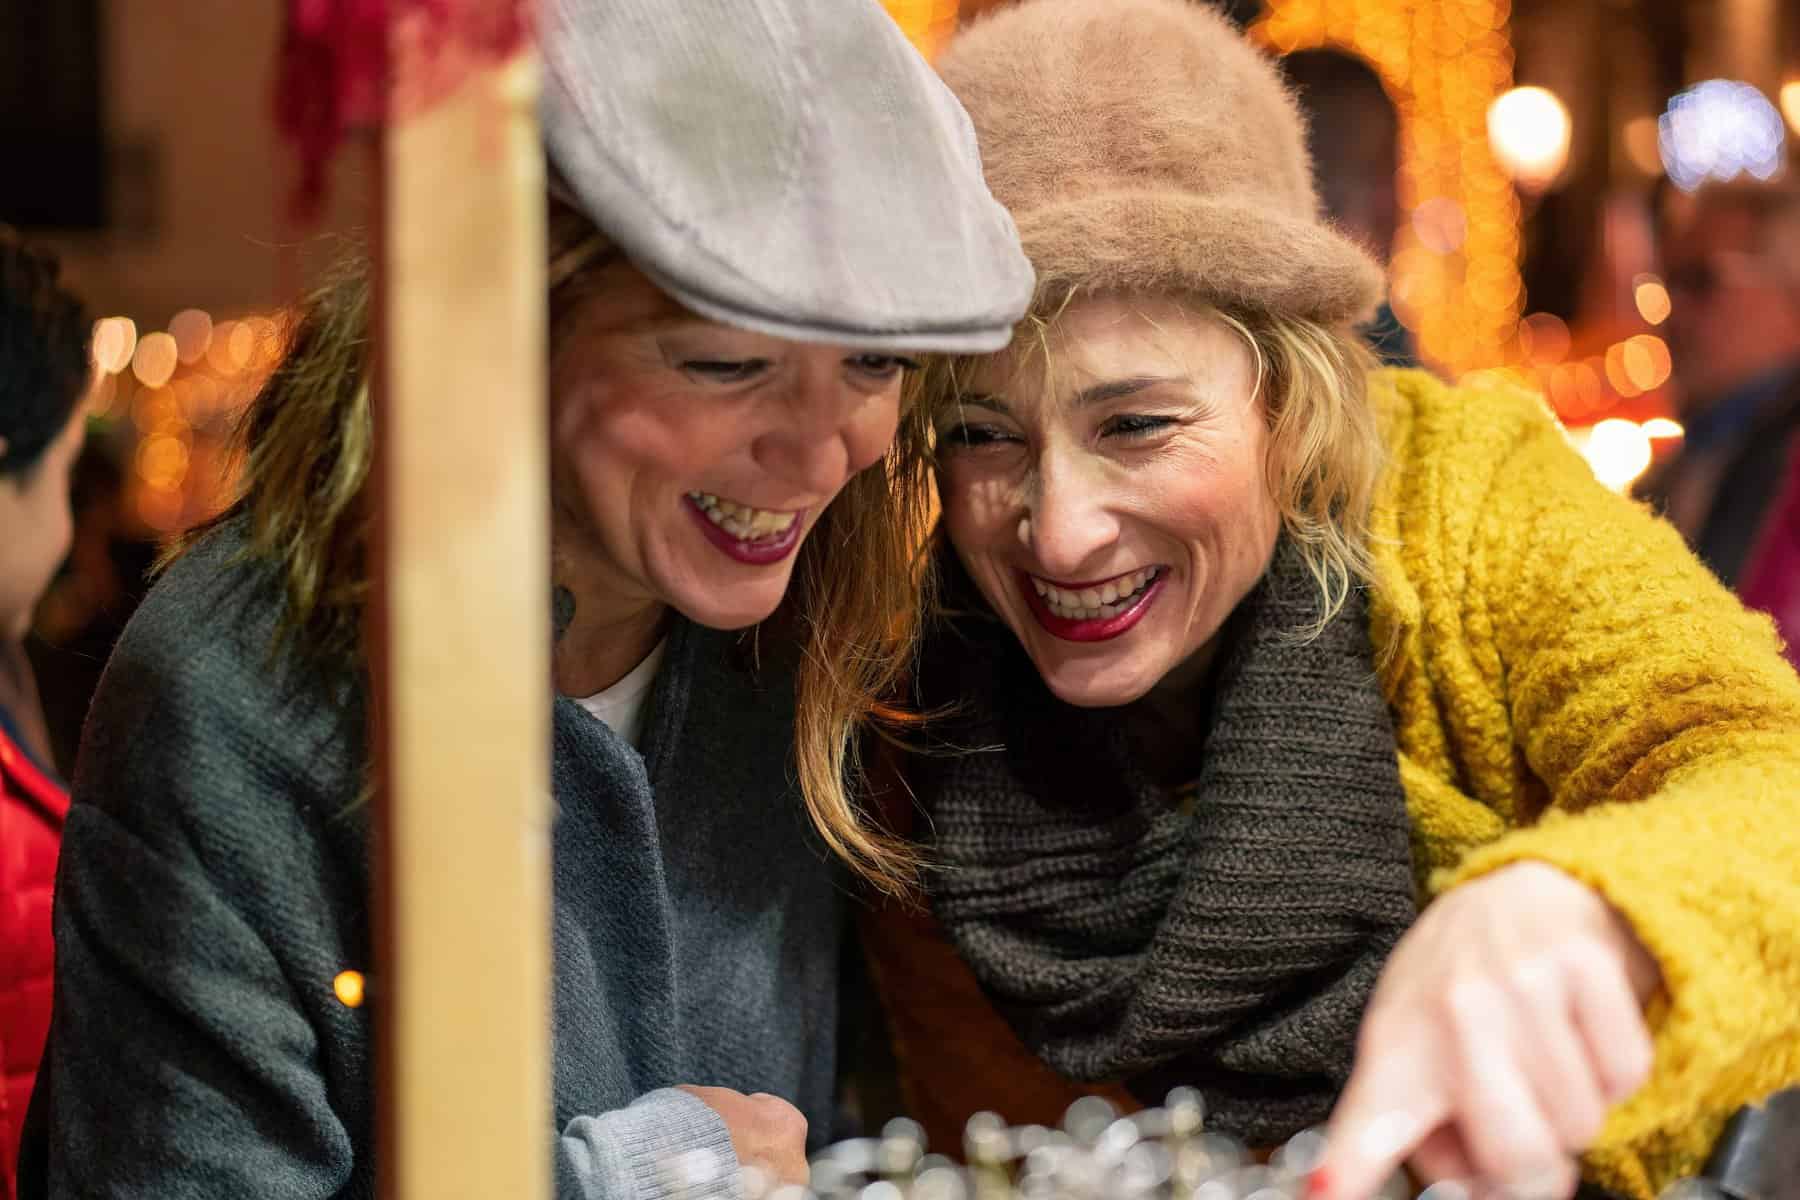 Two woman celebrating a Christmas tradition. They are smiling and laughing.